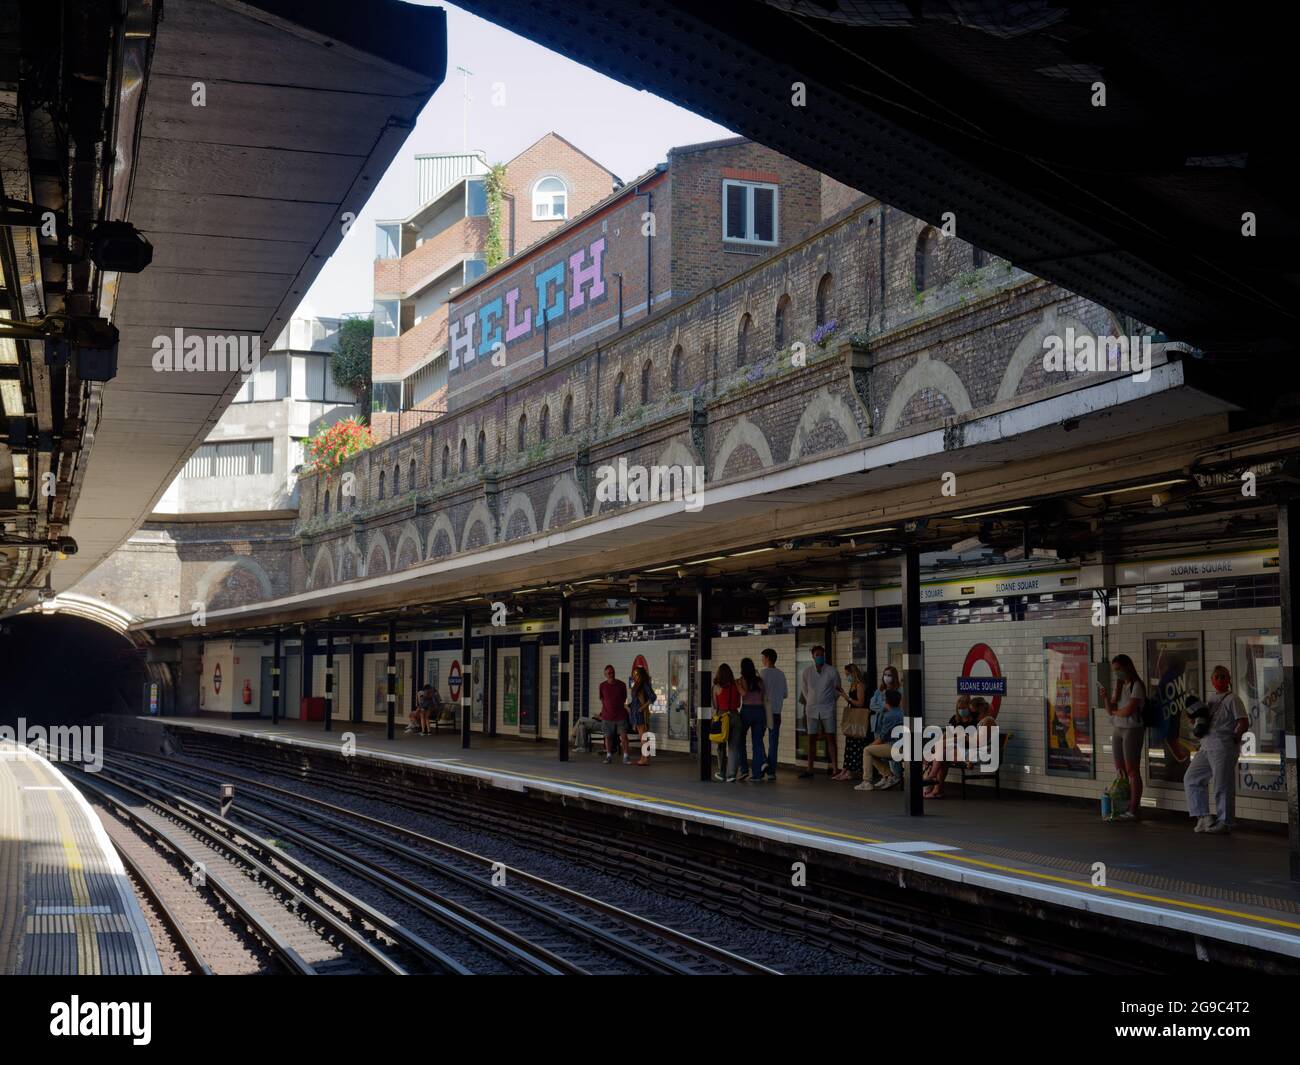 London, Greater London, England, June 12 2021: People waiting on a platform at Sloane Square underground Station or Tube Station. Stock Photo